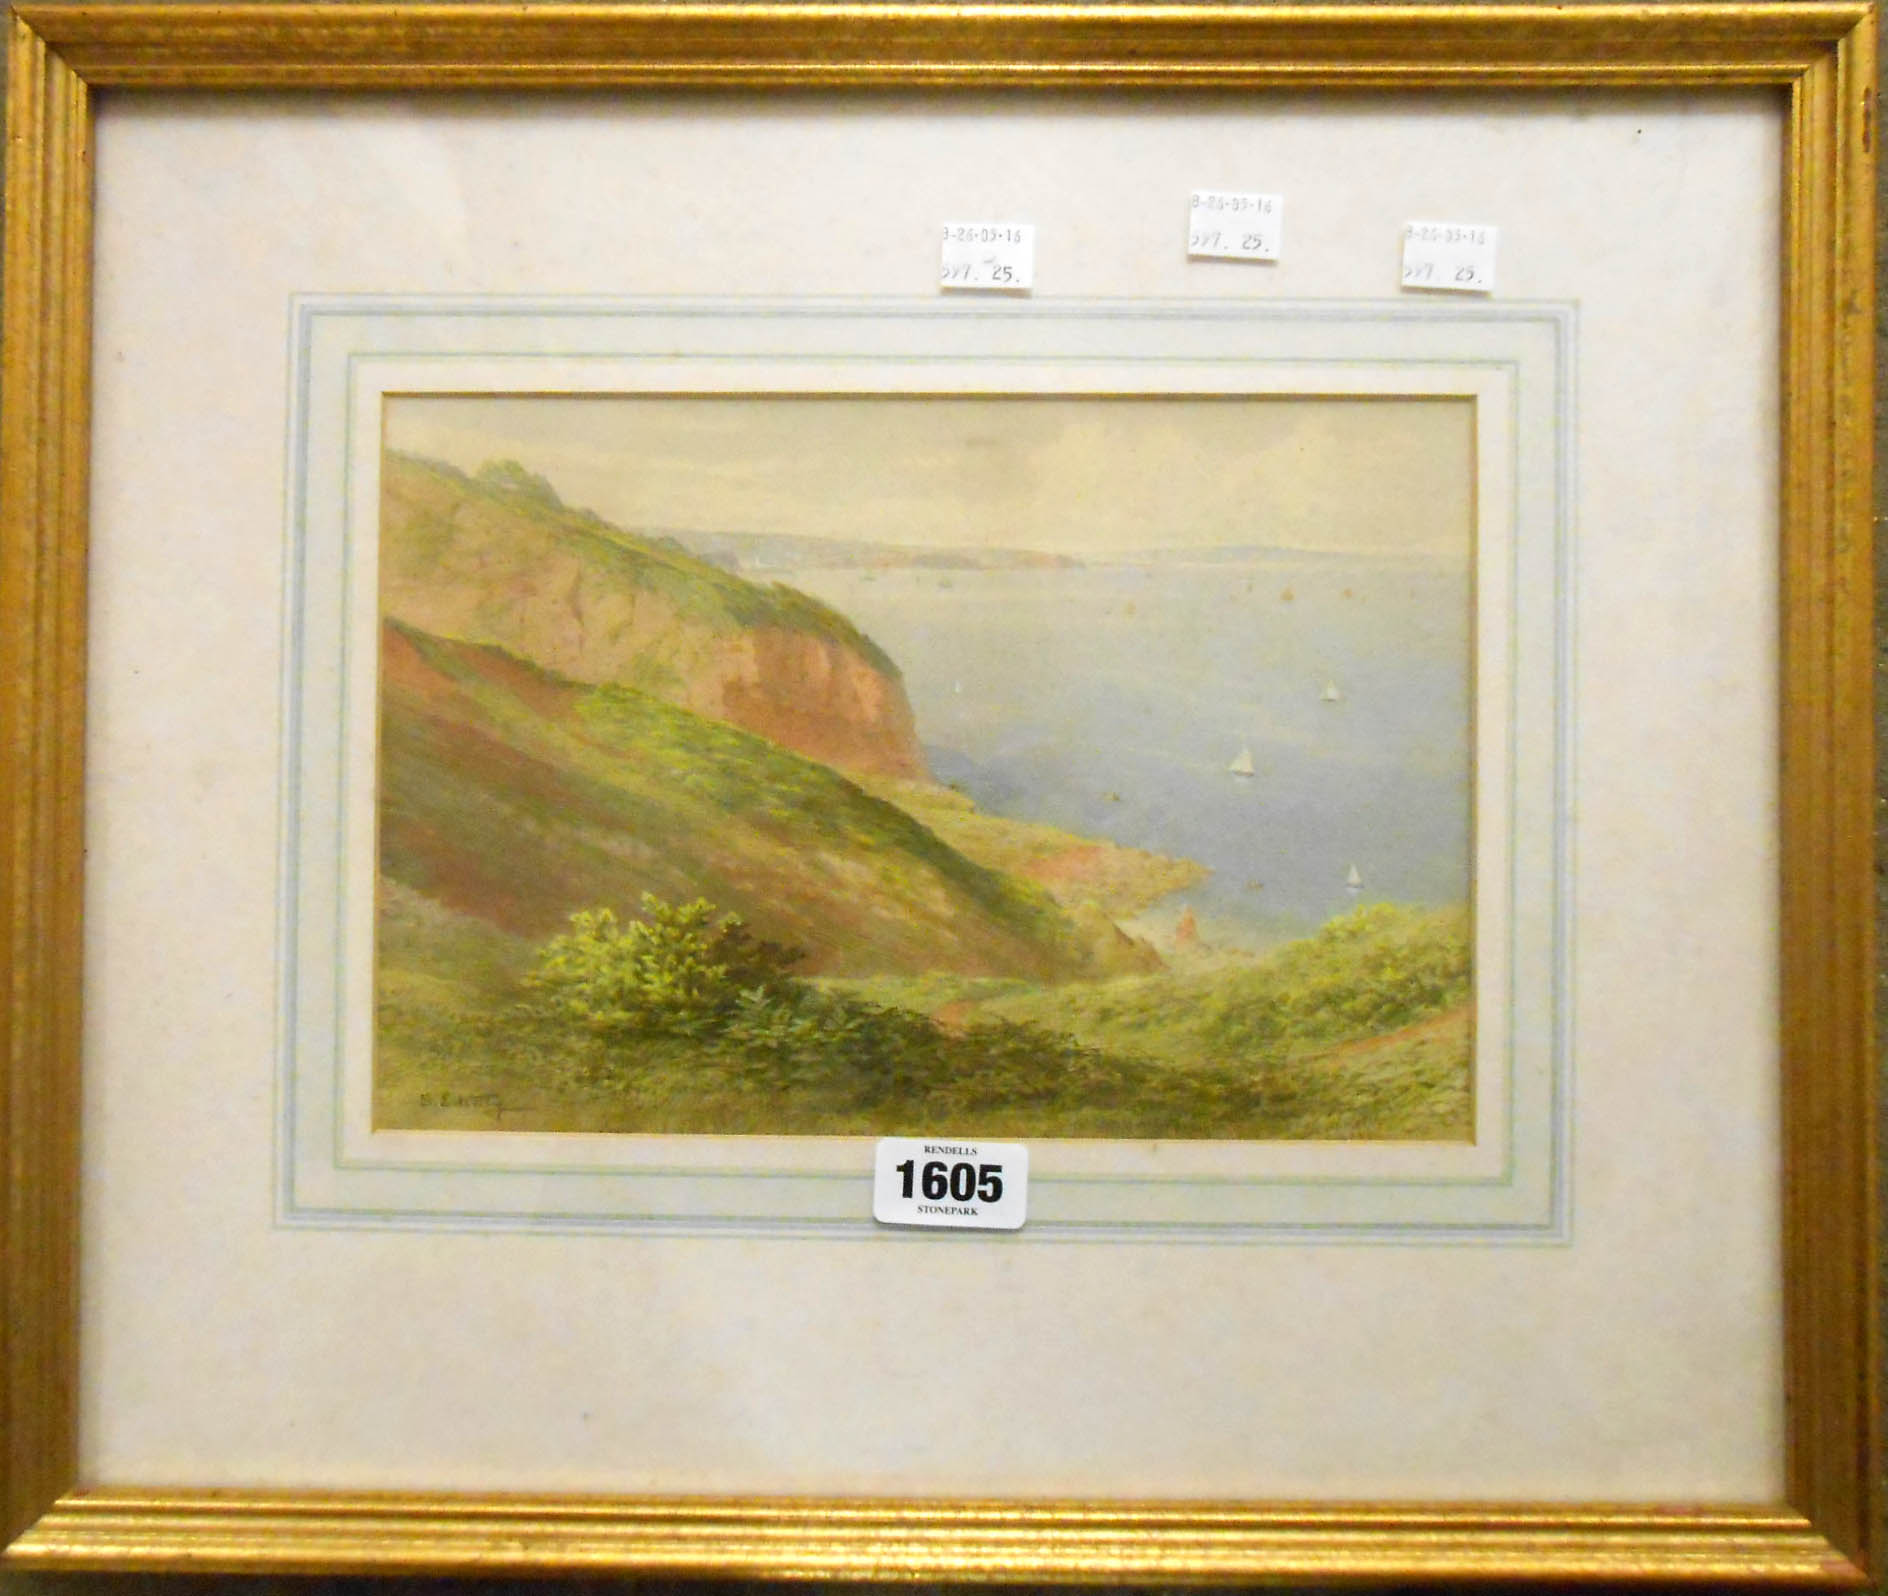 S. E. Kelly: a gilt framed watercolour depicting a view from cliffs overlooking Torbay - 7¼" X 10¾"